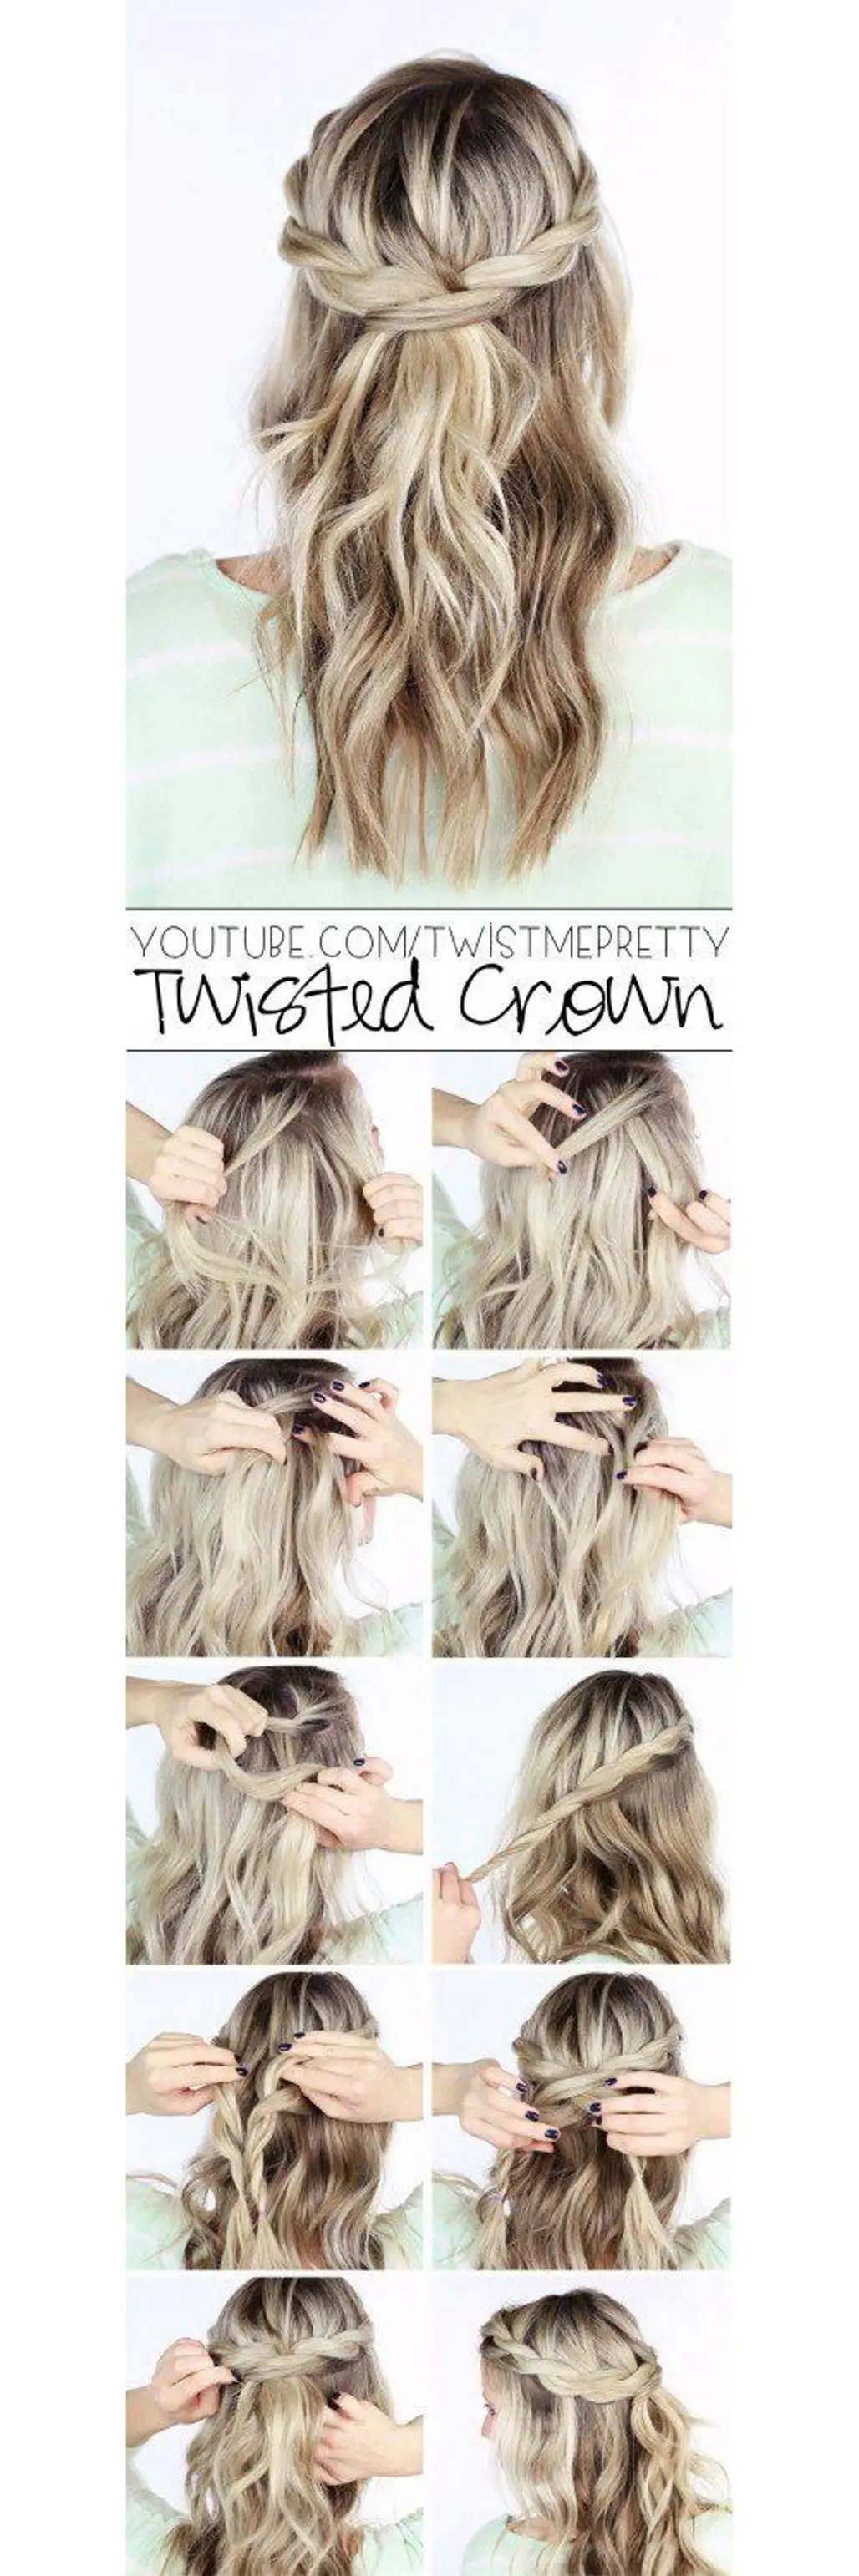 Twisted Crown